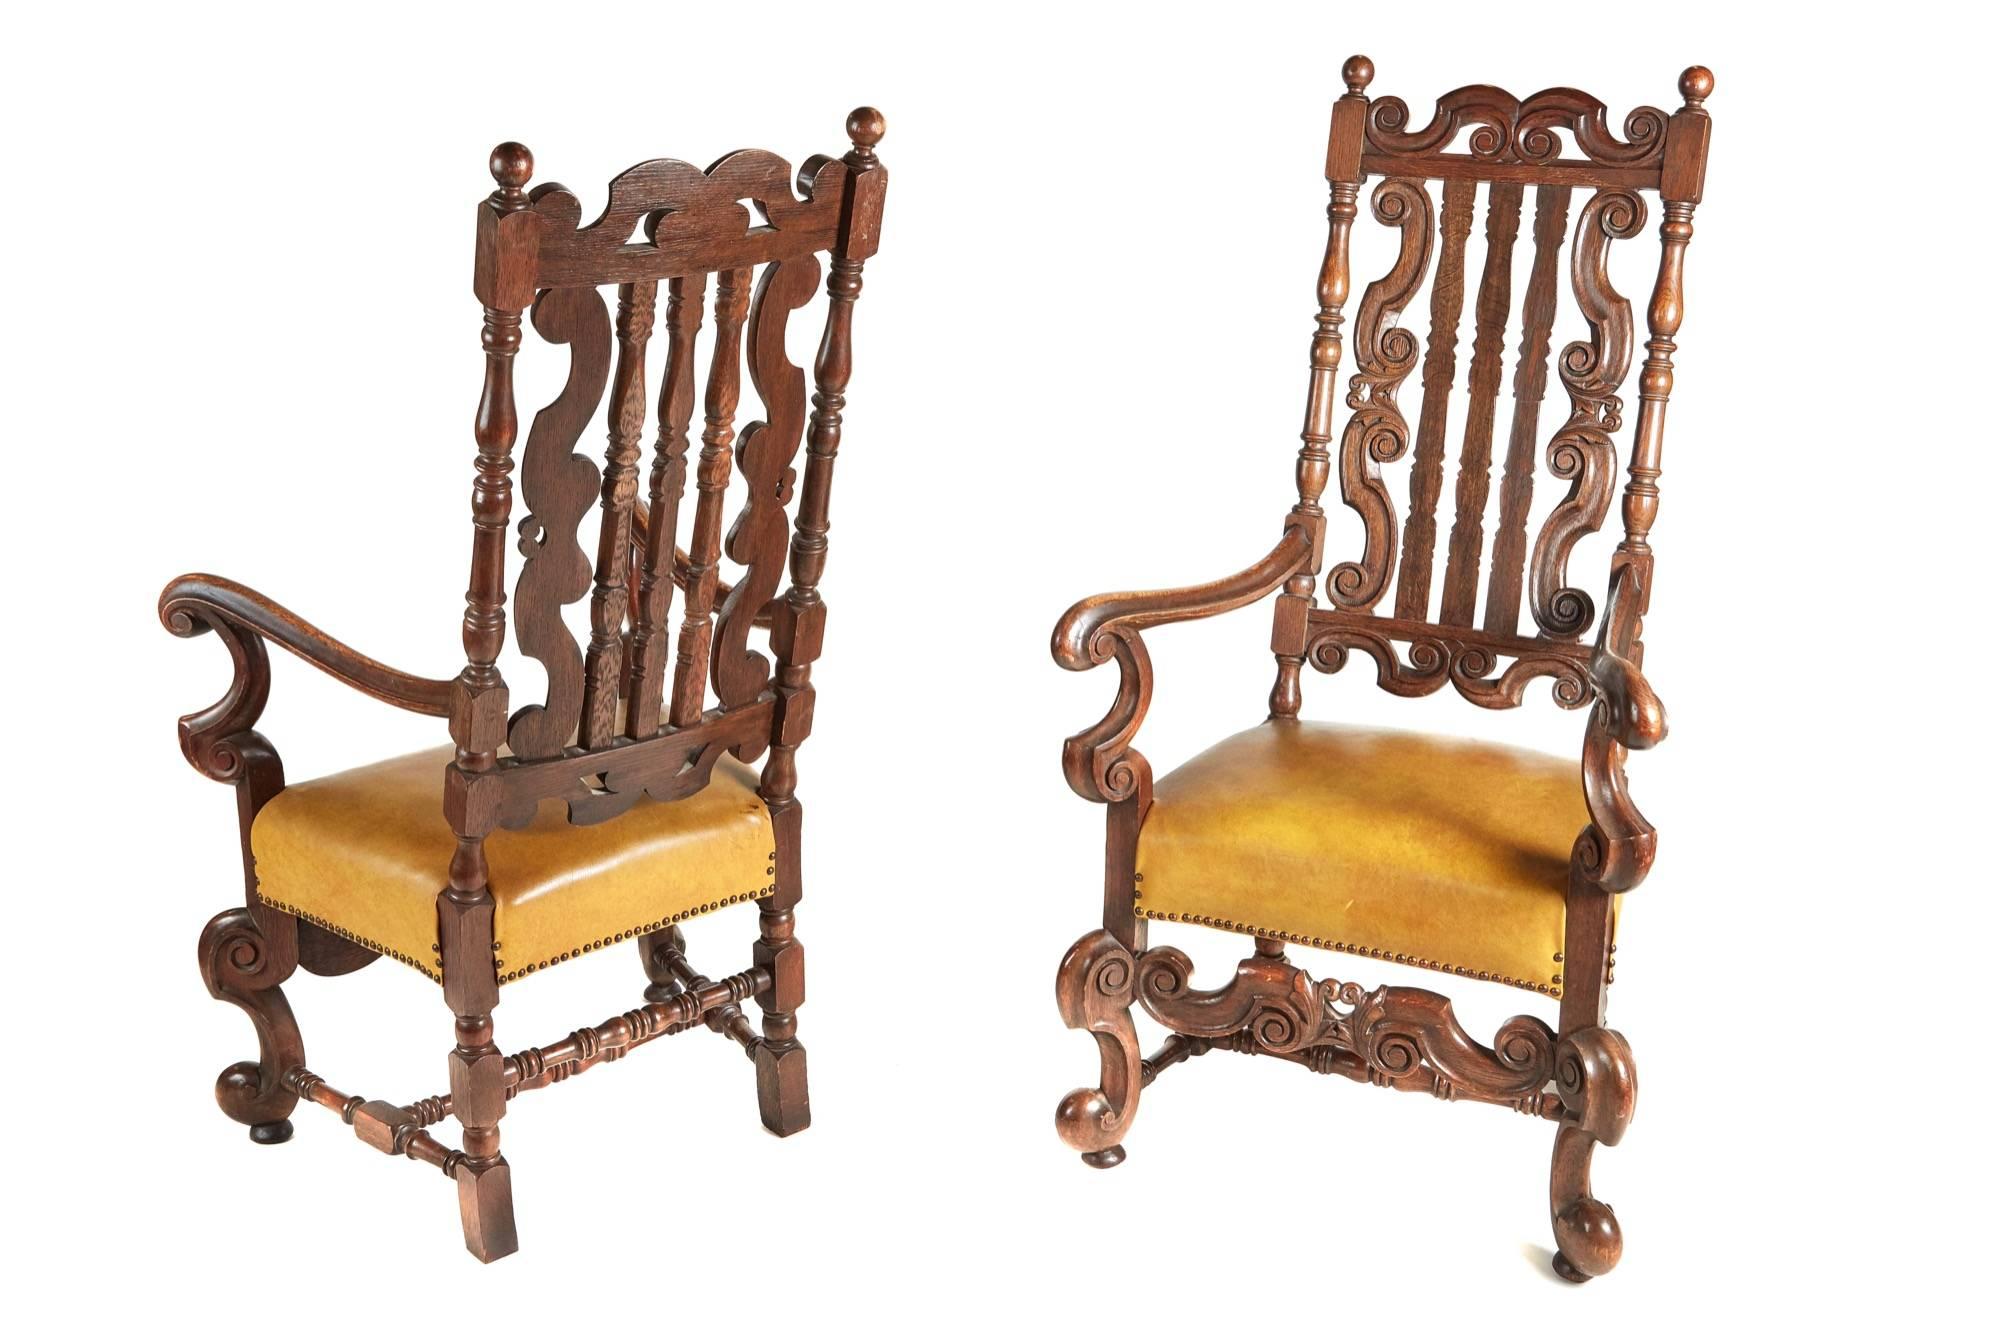 A large pair of Charles II style oak armchairs, with pierced scroll form and slatted backs between turned uprights, down swept arms and scrolling under tier, on short cabriole legs, overstuffed with leather upholstered seats.

Lovely colour and